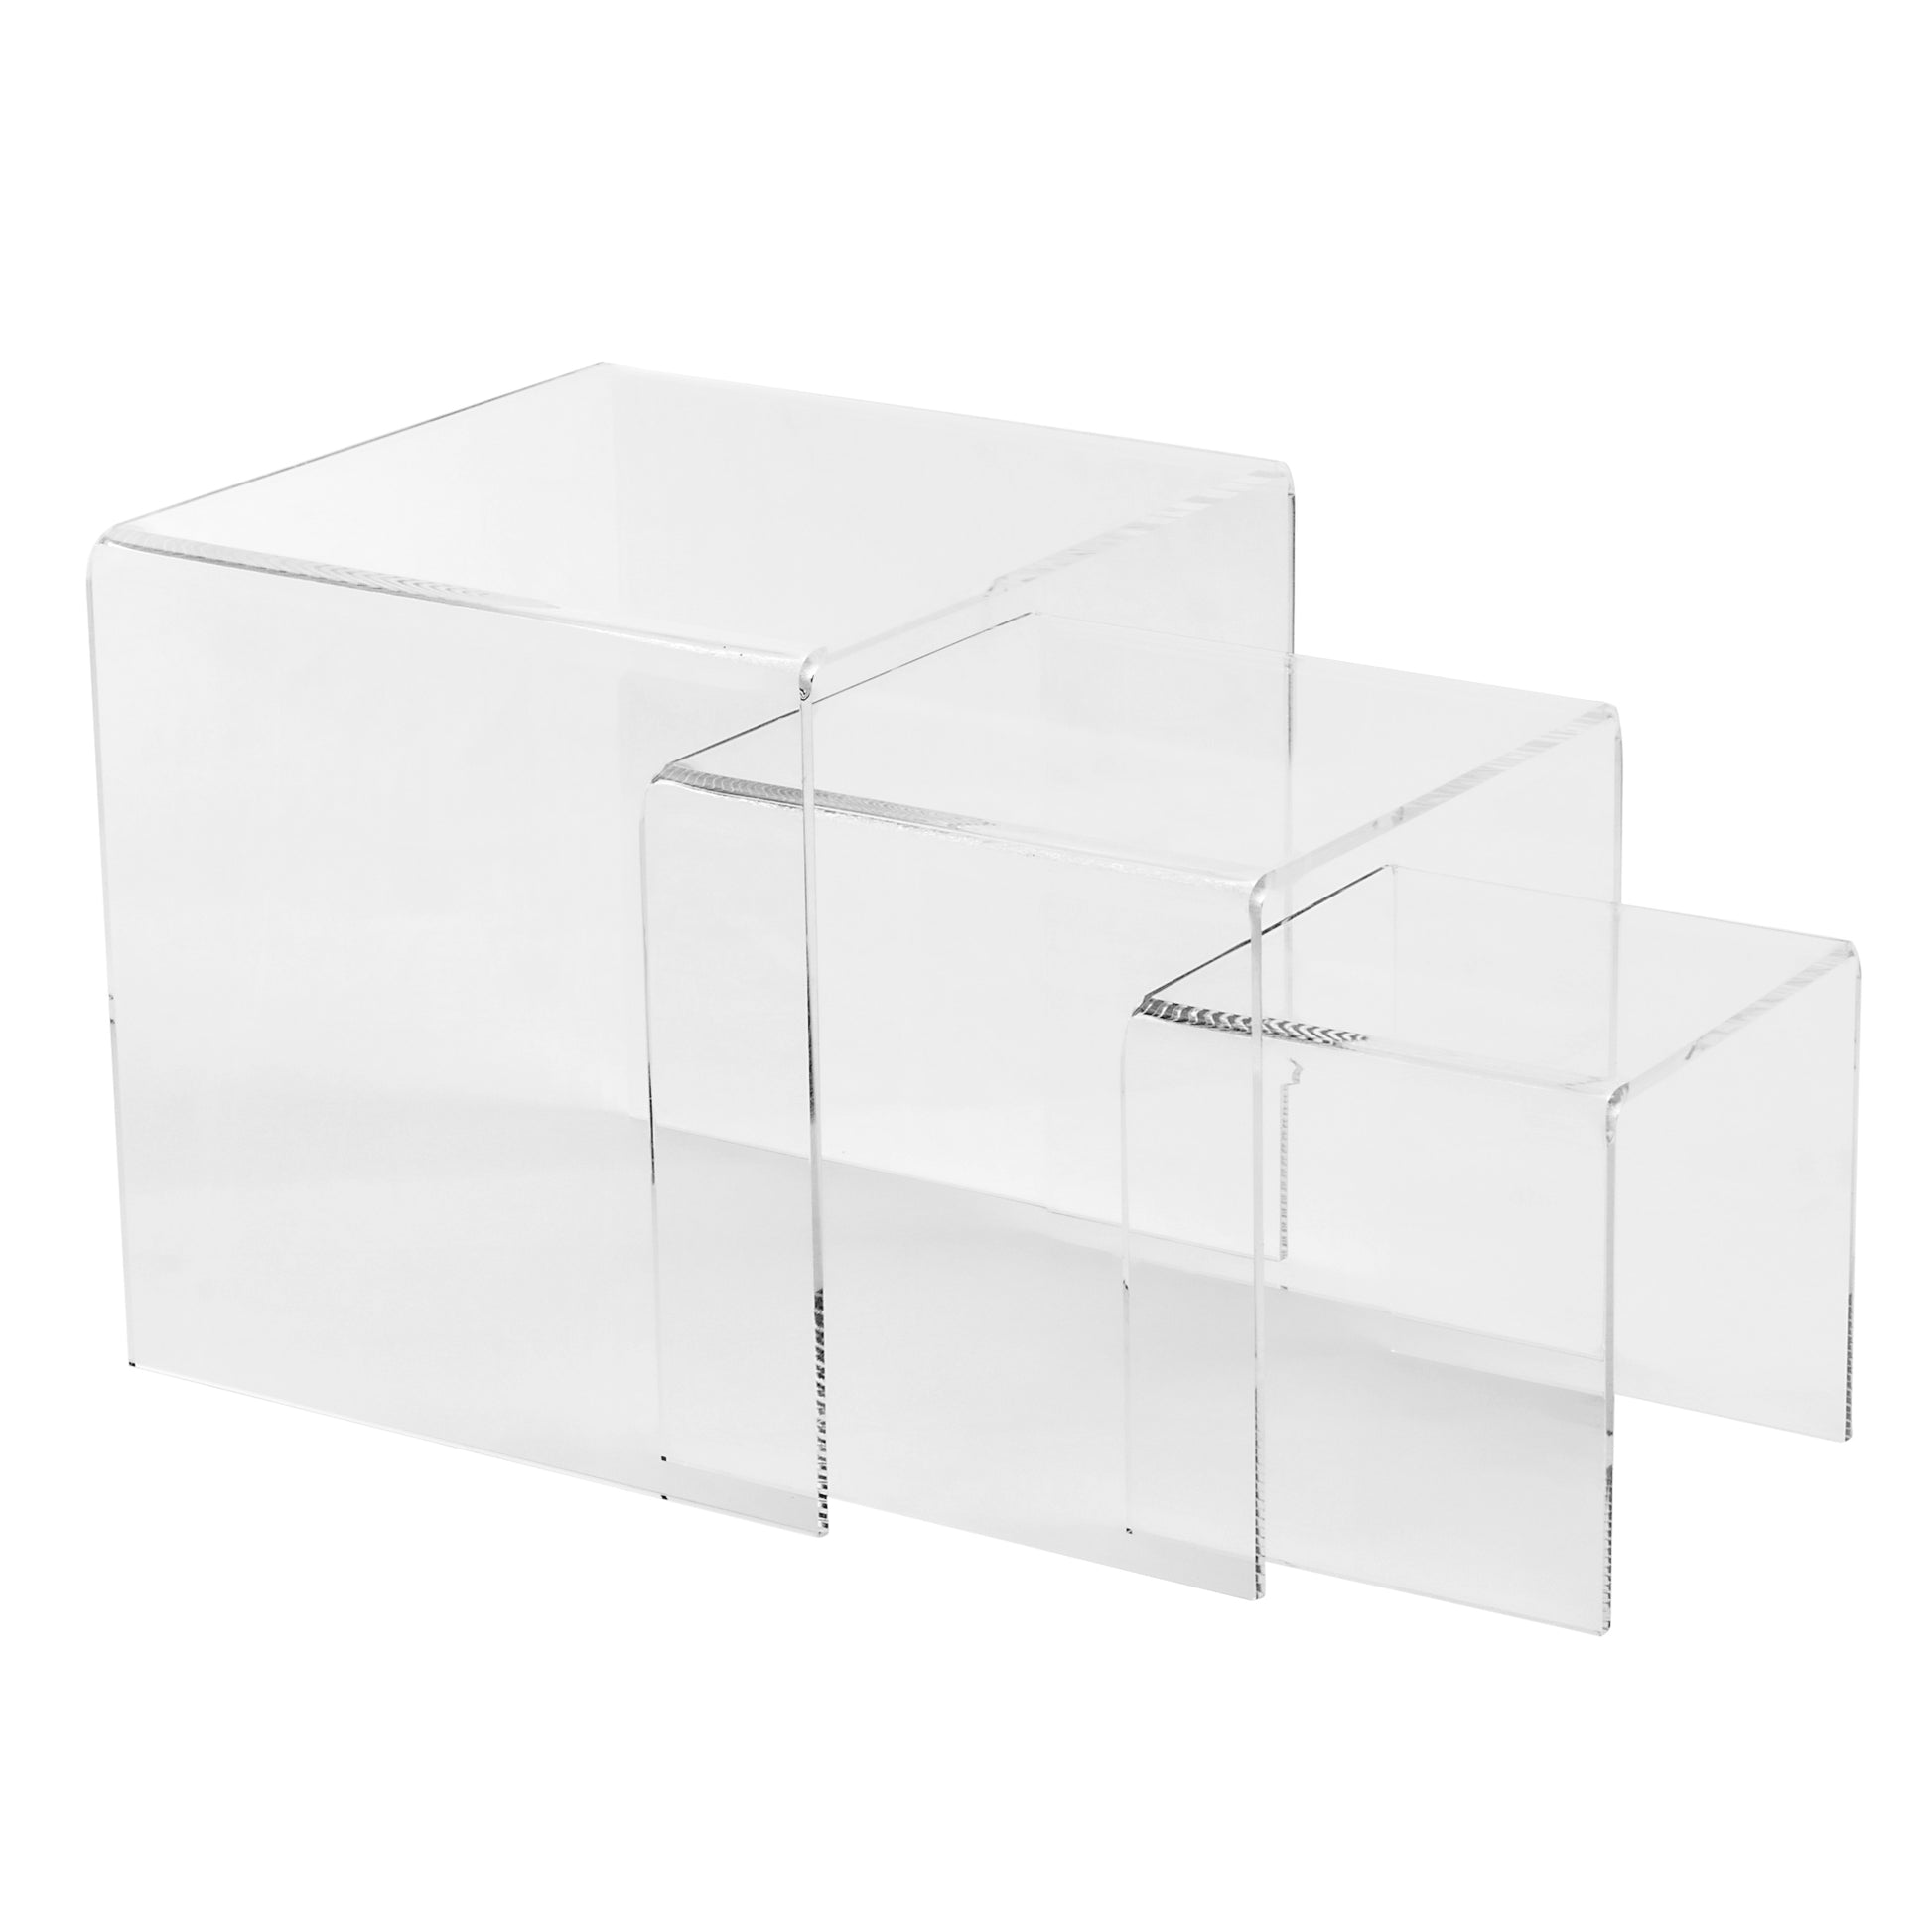 Set of 3 Acrylic Riser Display Stands - Clear - CV Linens